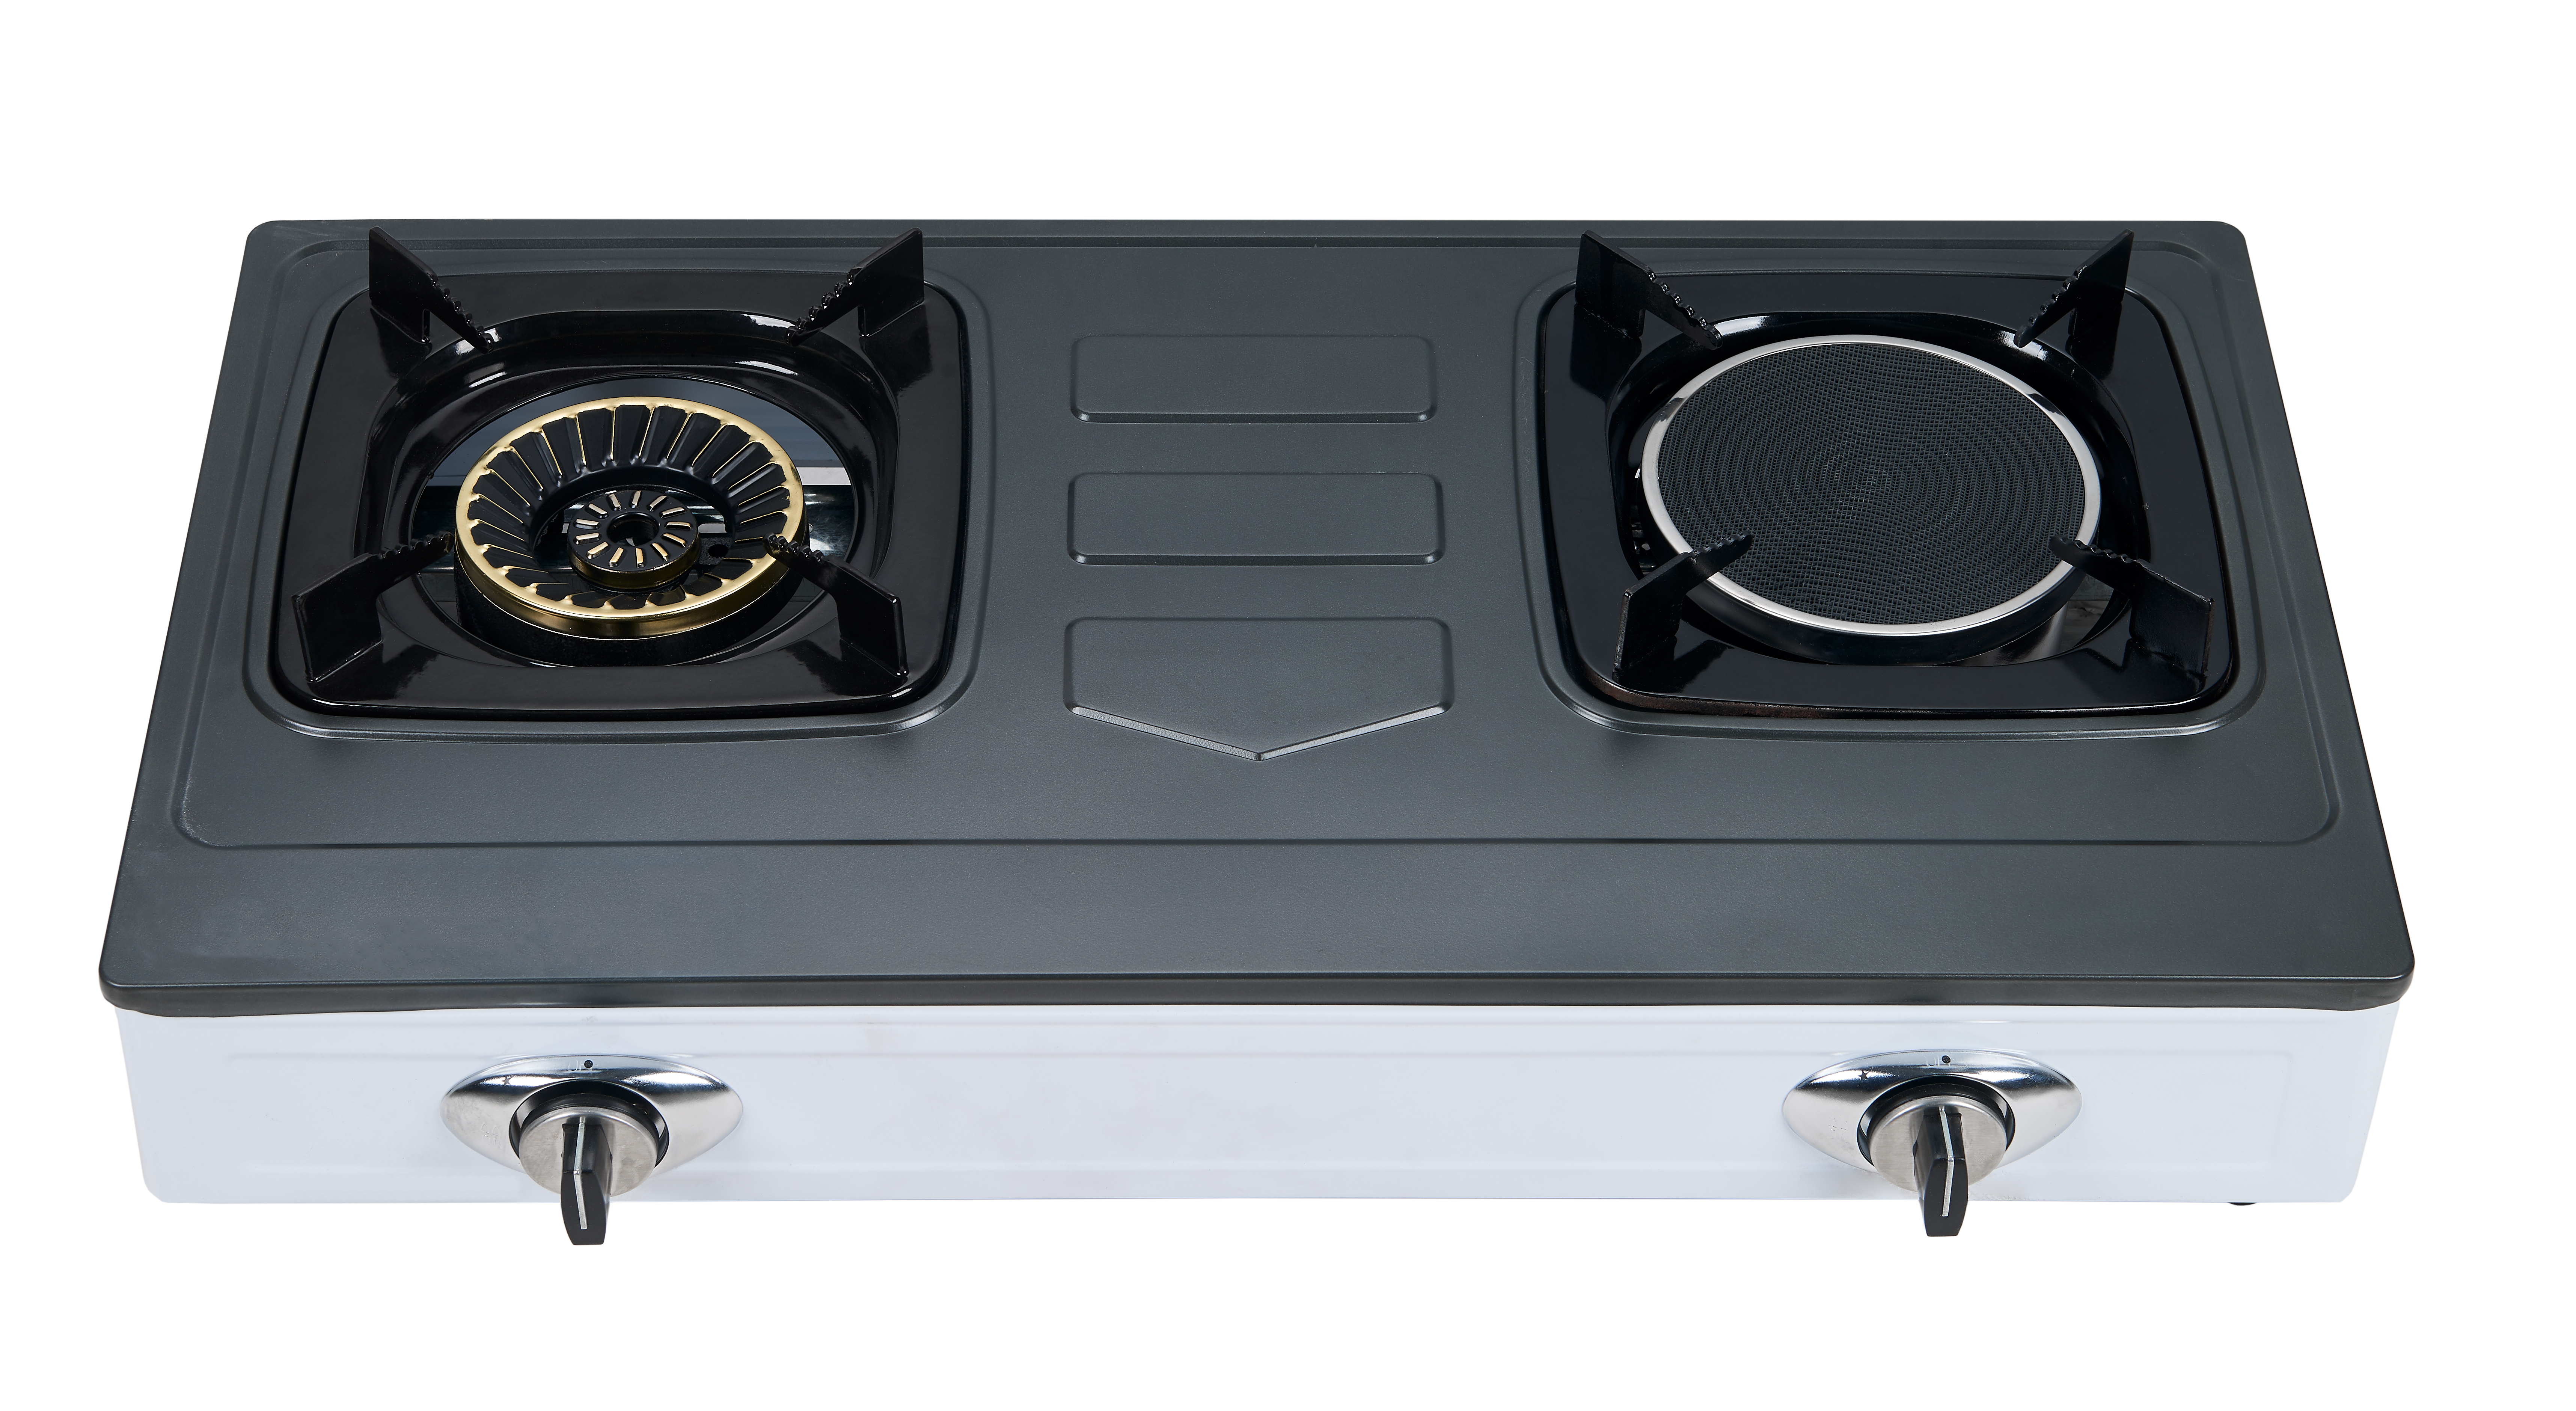 Iron Sheet Gas Cooker na may Infrared Burner at Automatic Ignition Embedded Stove Gas Hob Exporter